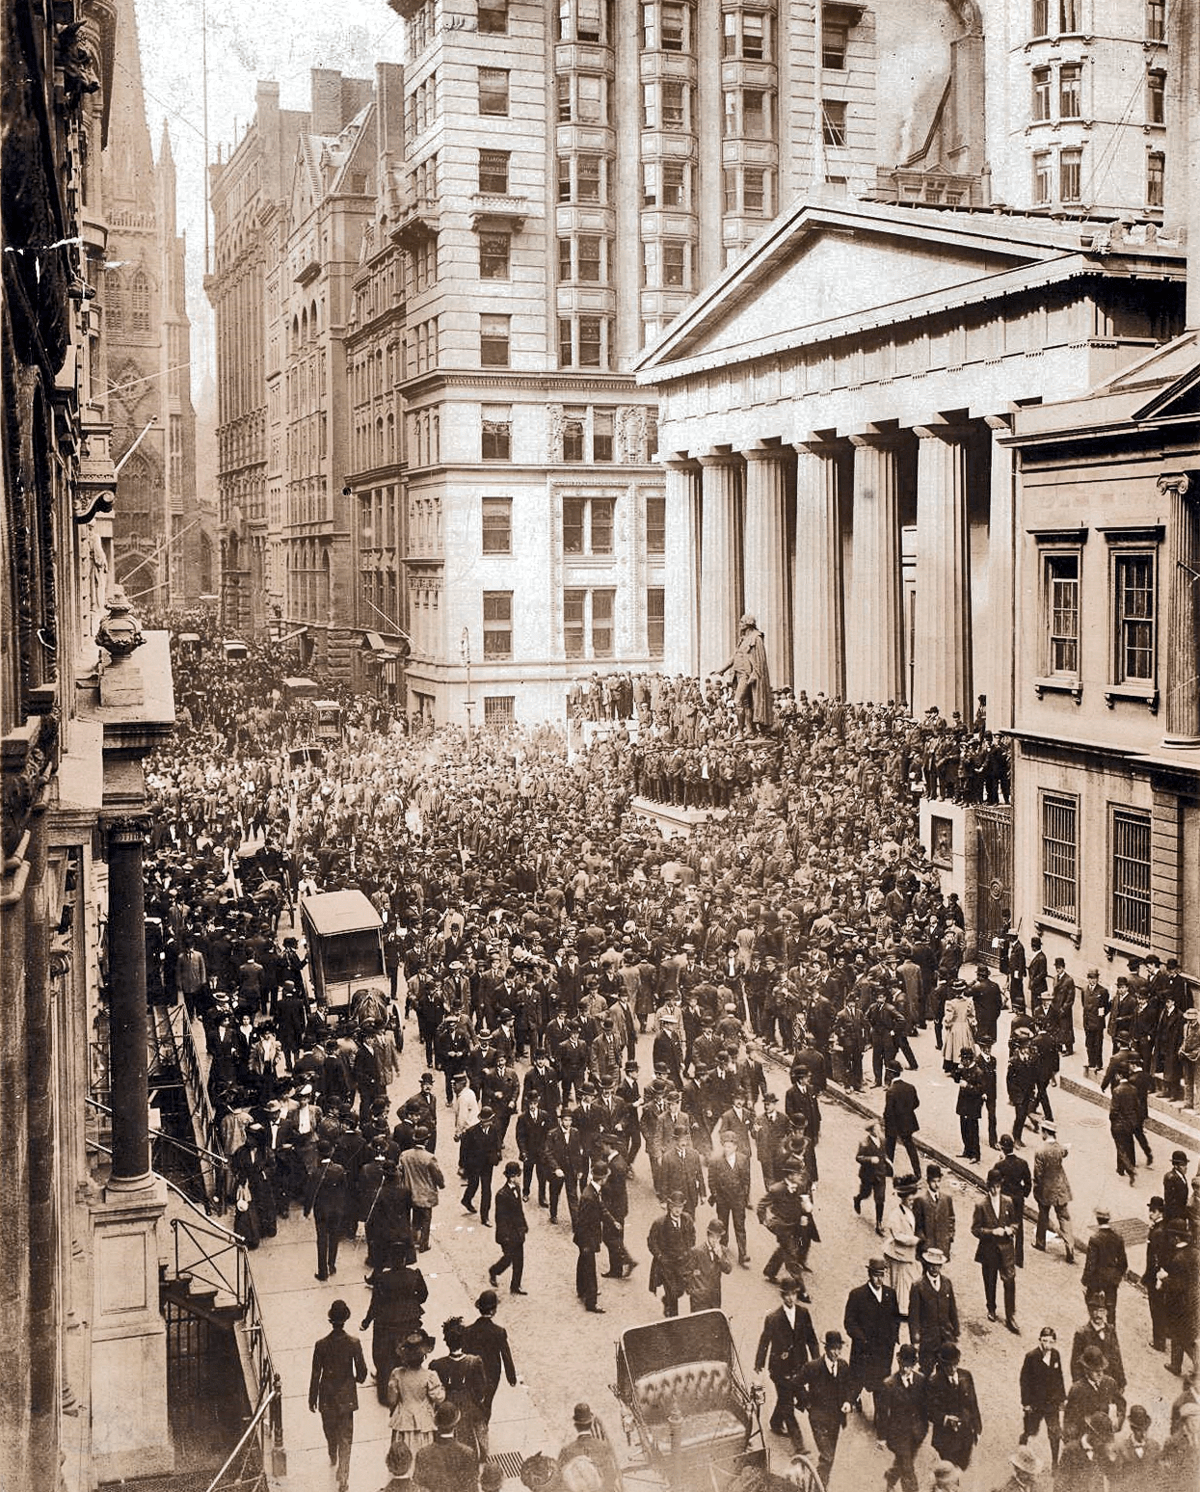 October 14, 1907 marks the first day of the American banking panic of 1907. 